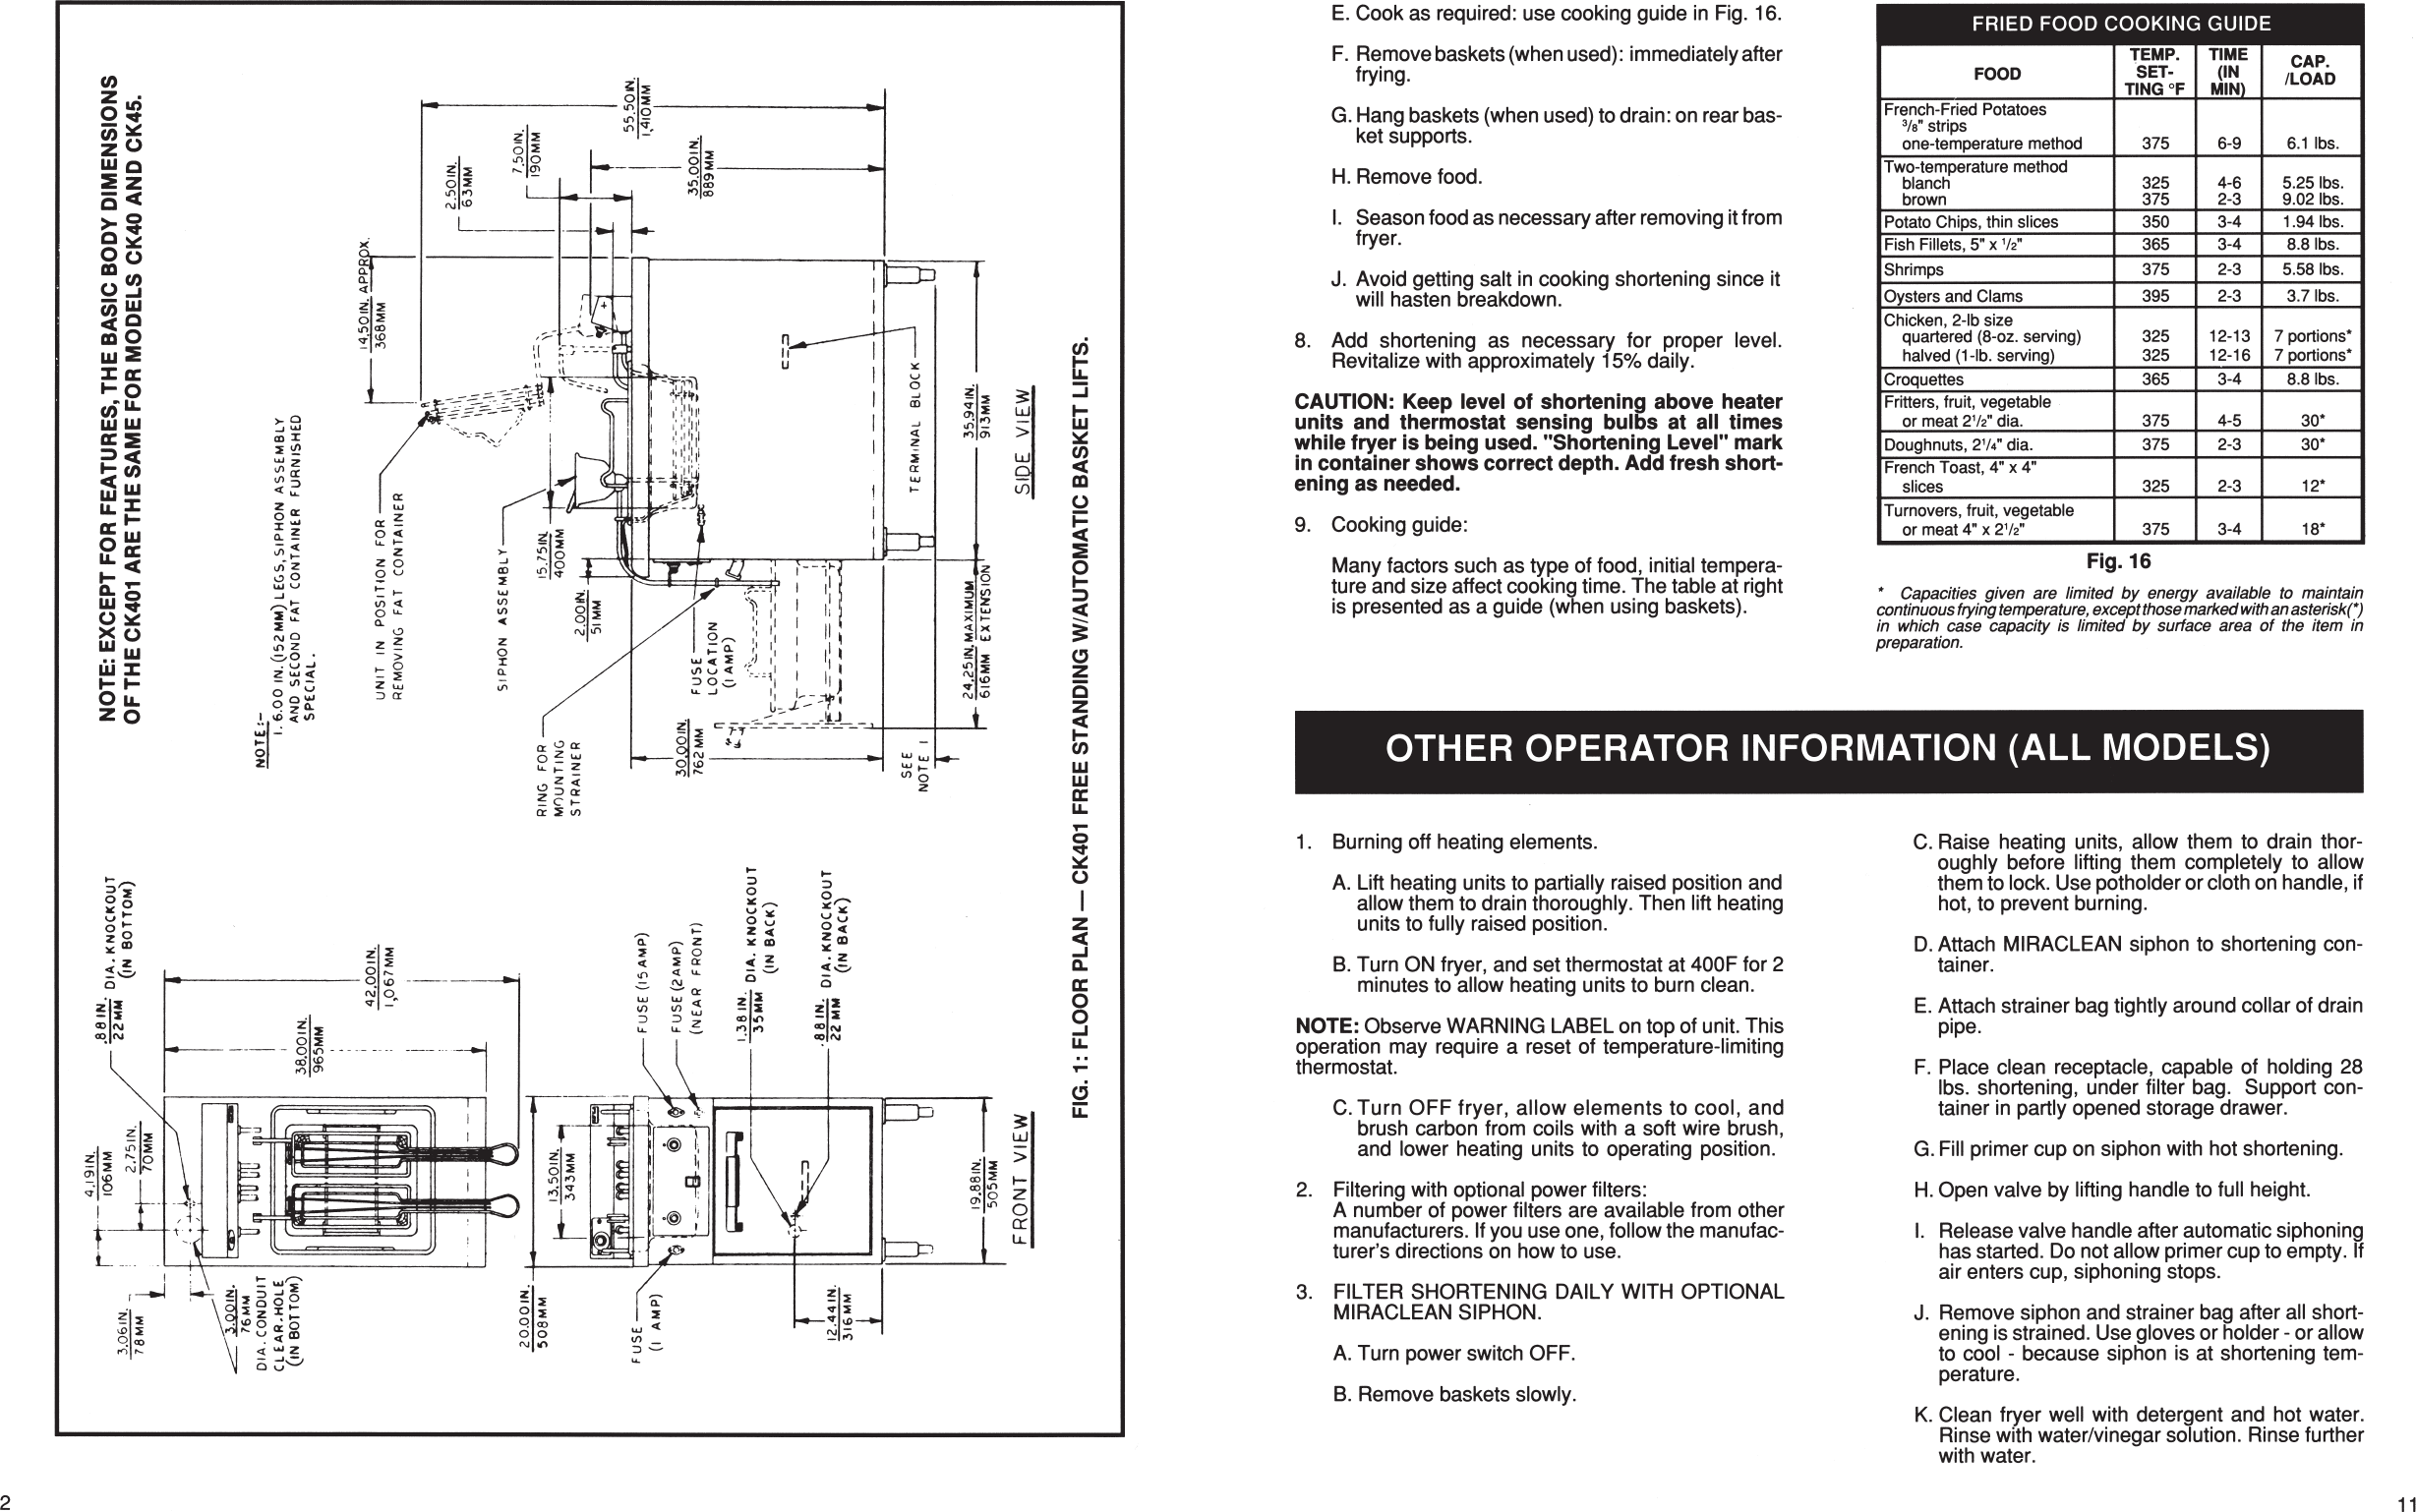 Page 11 of 12 - Hobart Hobart-Corp-Fryer-Ck40-Users-Manual- F27400  Hobart-corp-fryer-ck40-users-manual